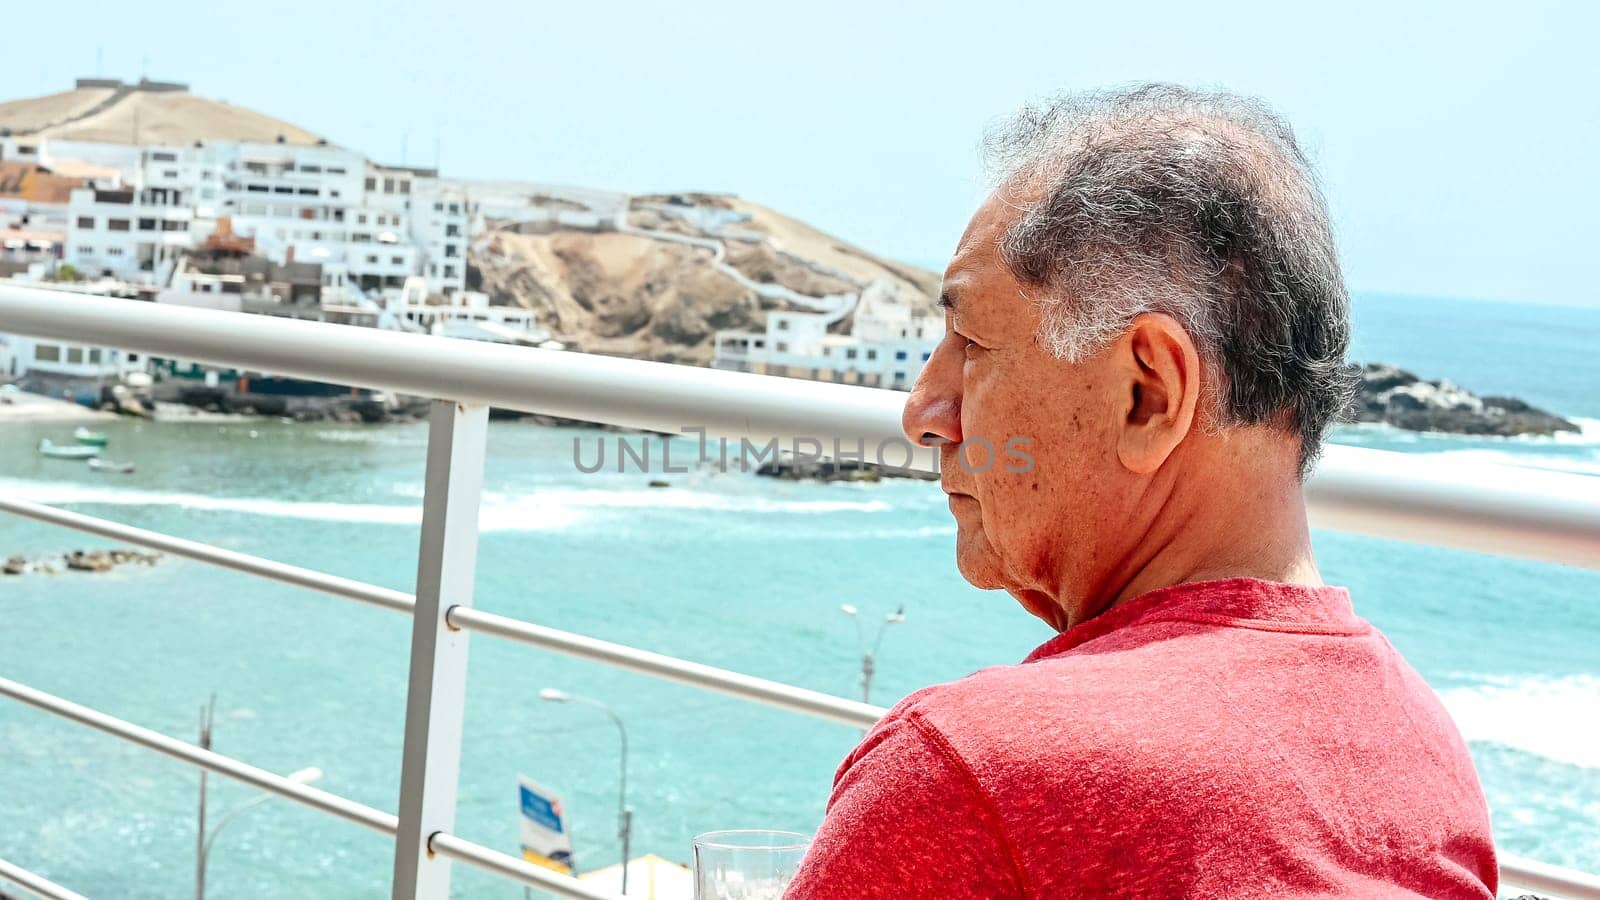 Mature man sitting on a balcony overlooking the sea with a cocktail. by Peruphotoart